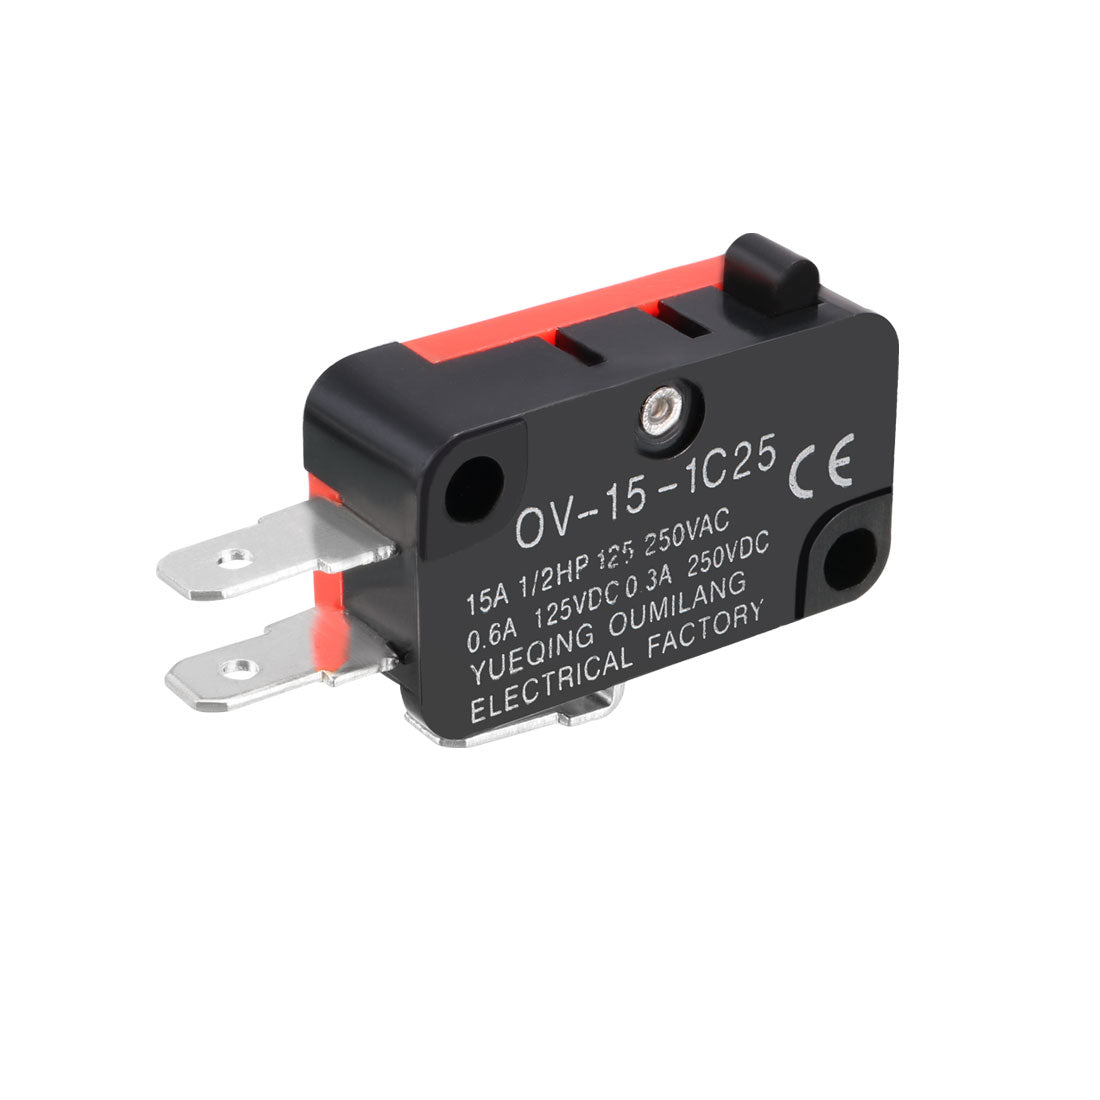 uxcell Uxcell 5PCS OV-15-1C25 15A 125/250V AC 3 Terminals Snap Button Type Micro Limit Switch